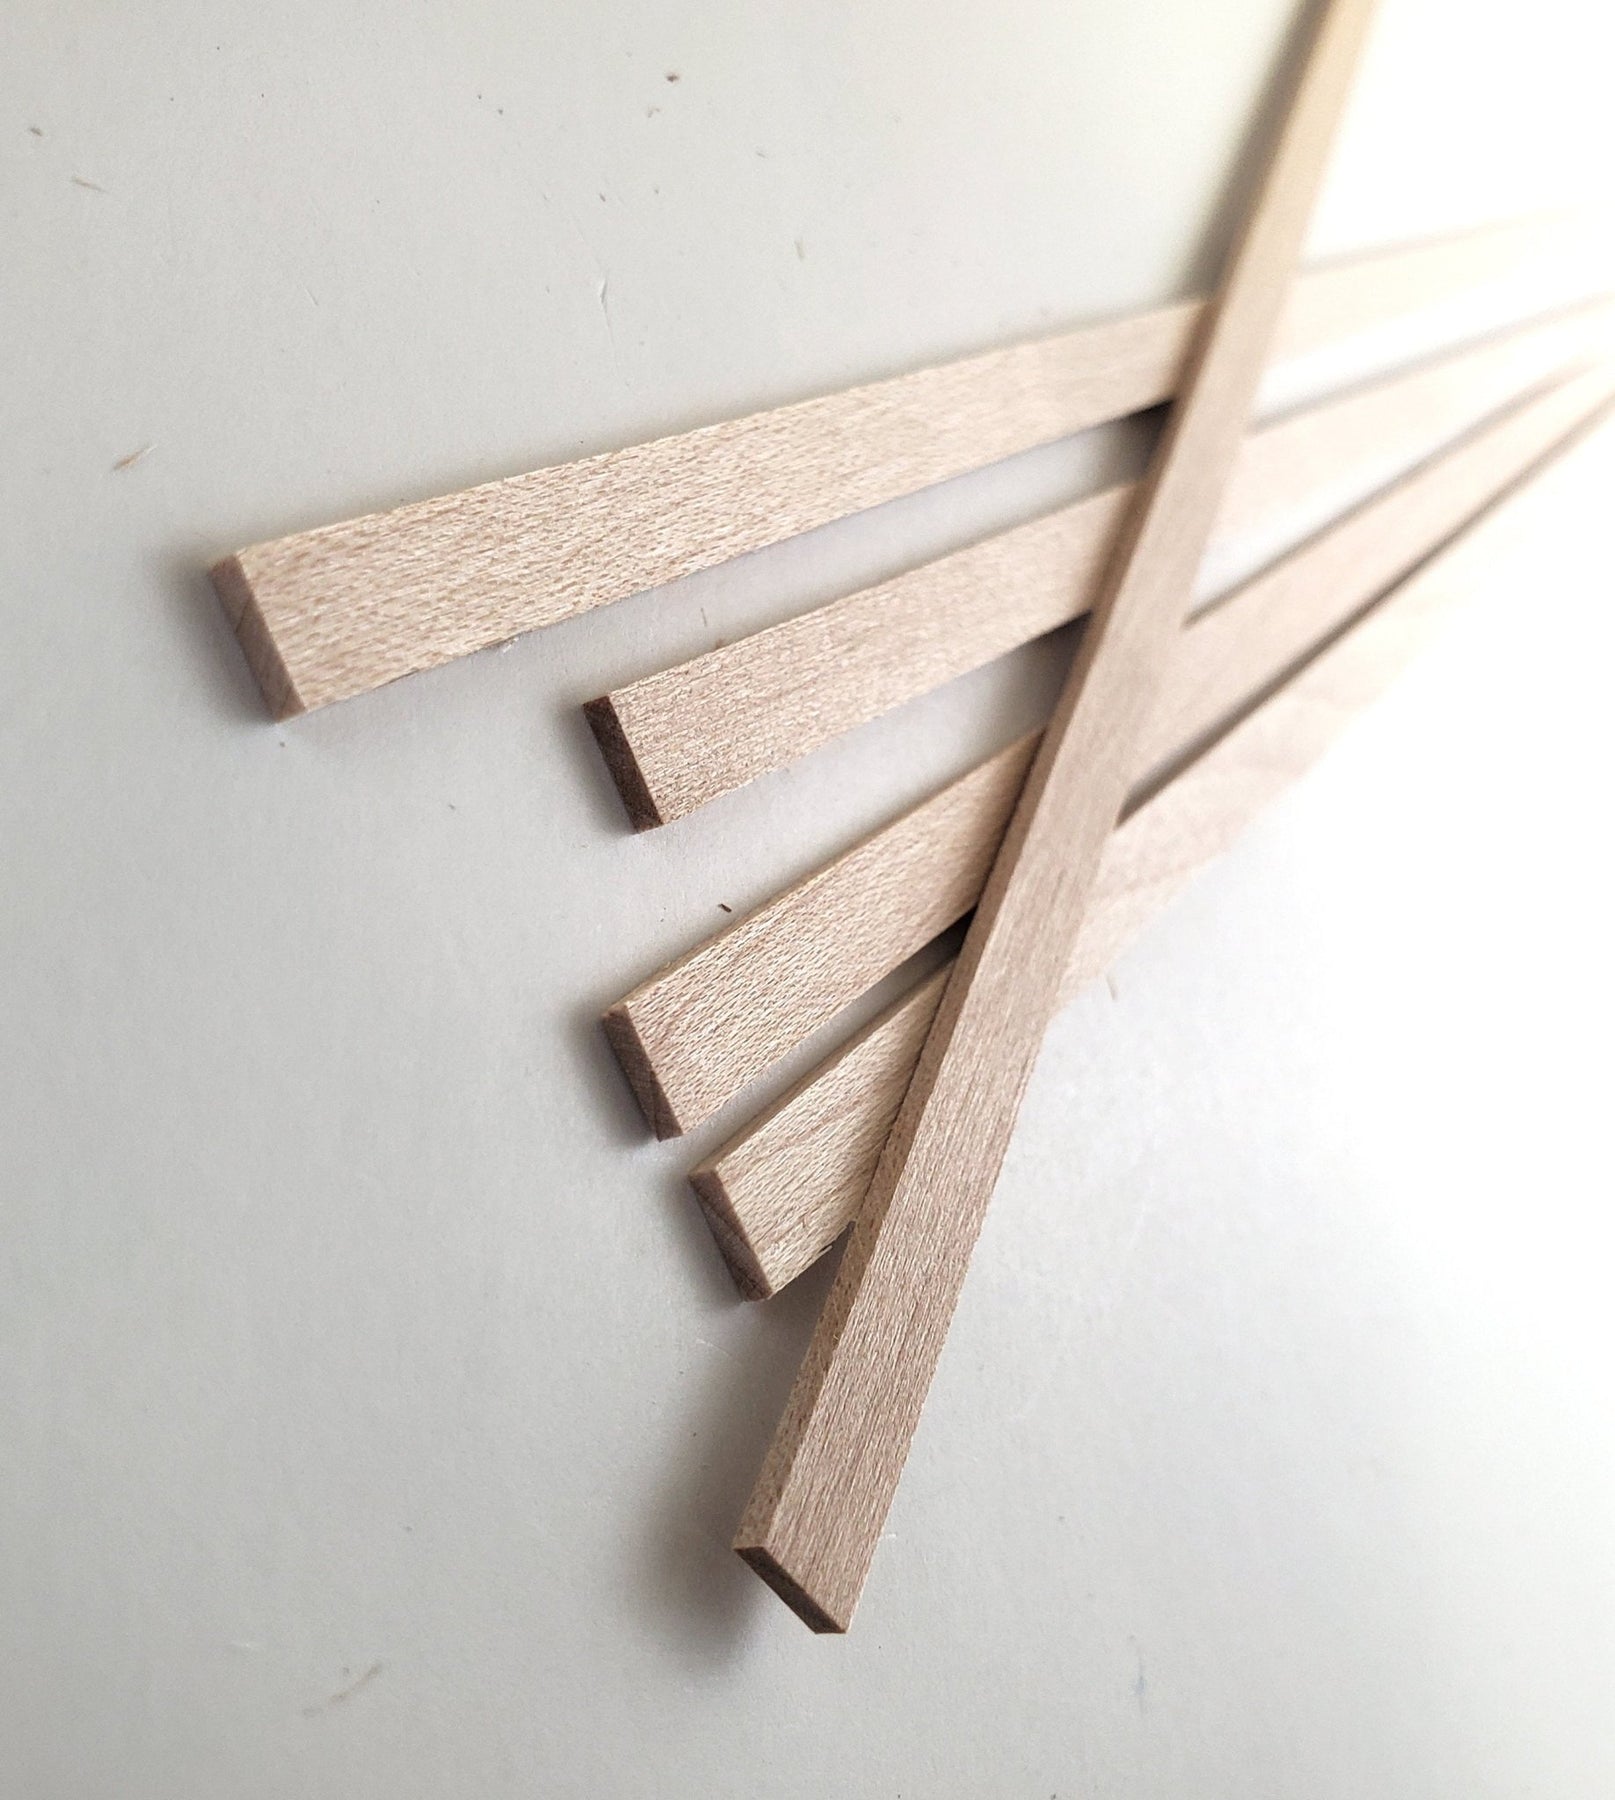 Cherry Wood Strips 5 Pieces 1/16 X 1/4 X 18 Long Crafts Models Miniatures 